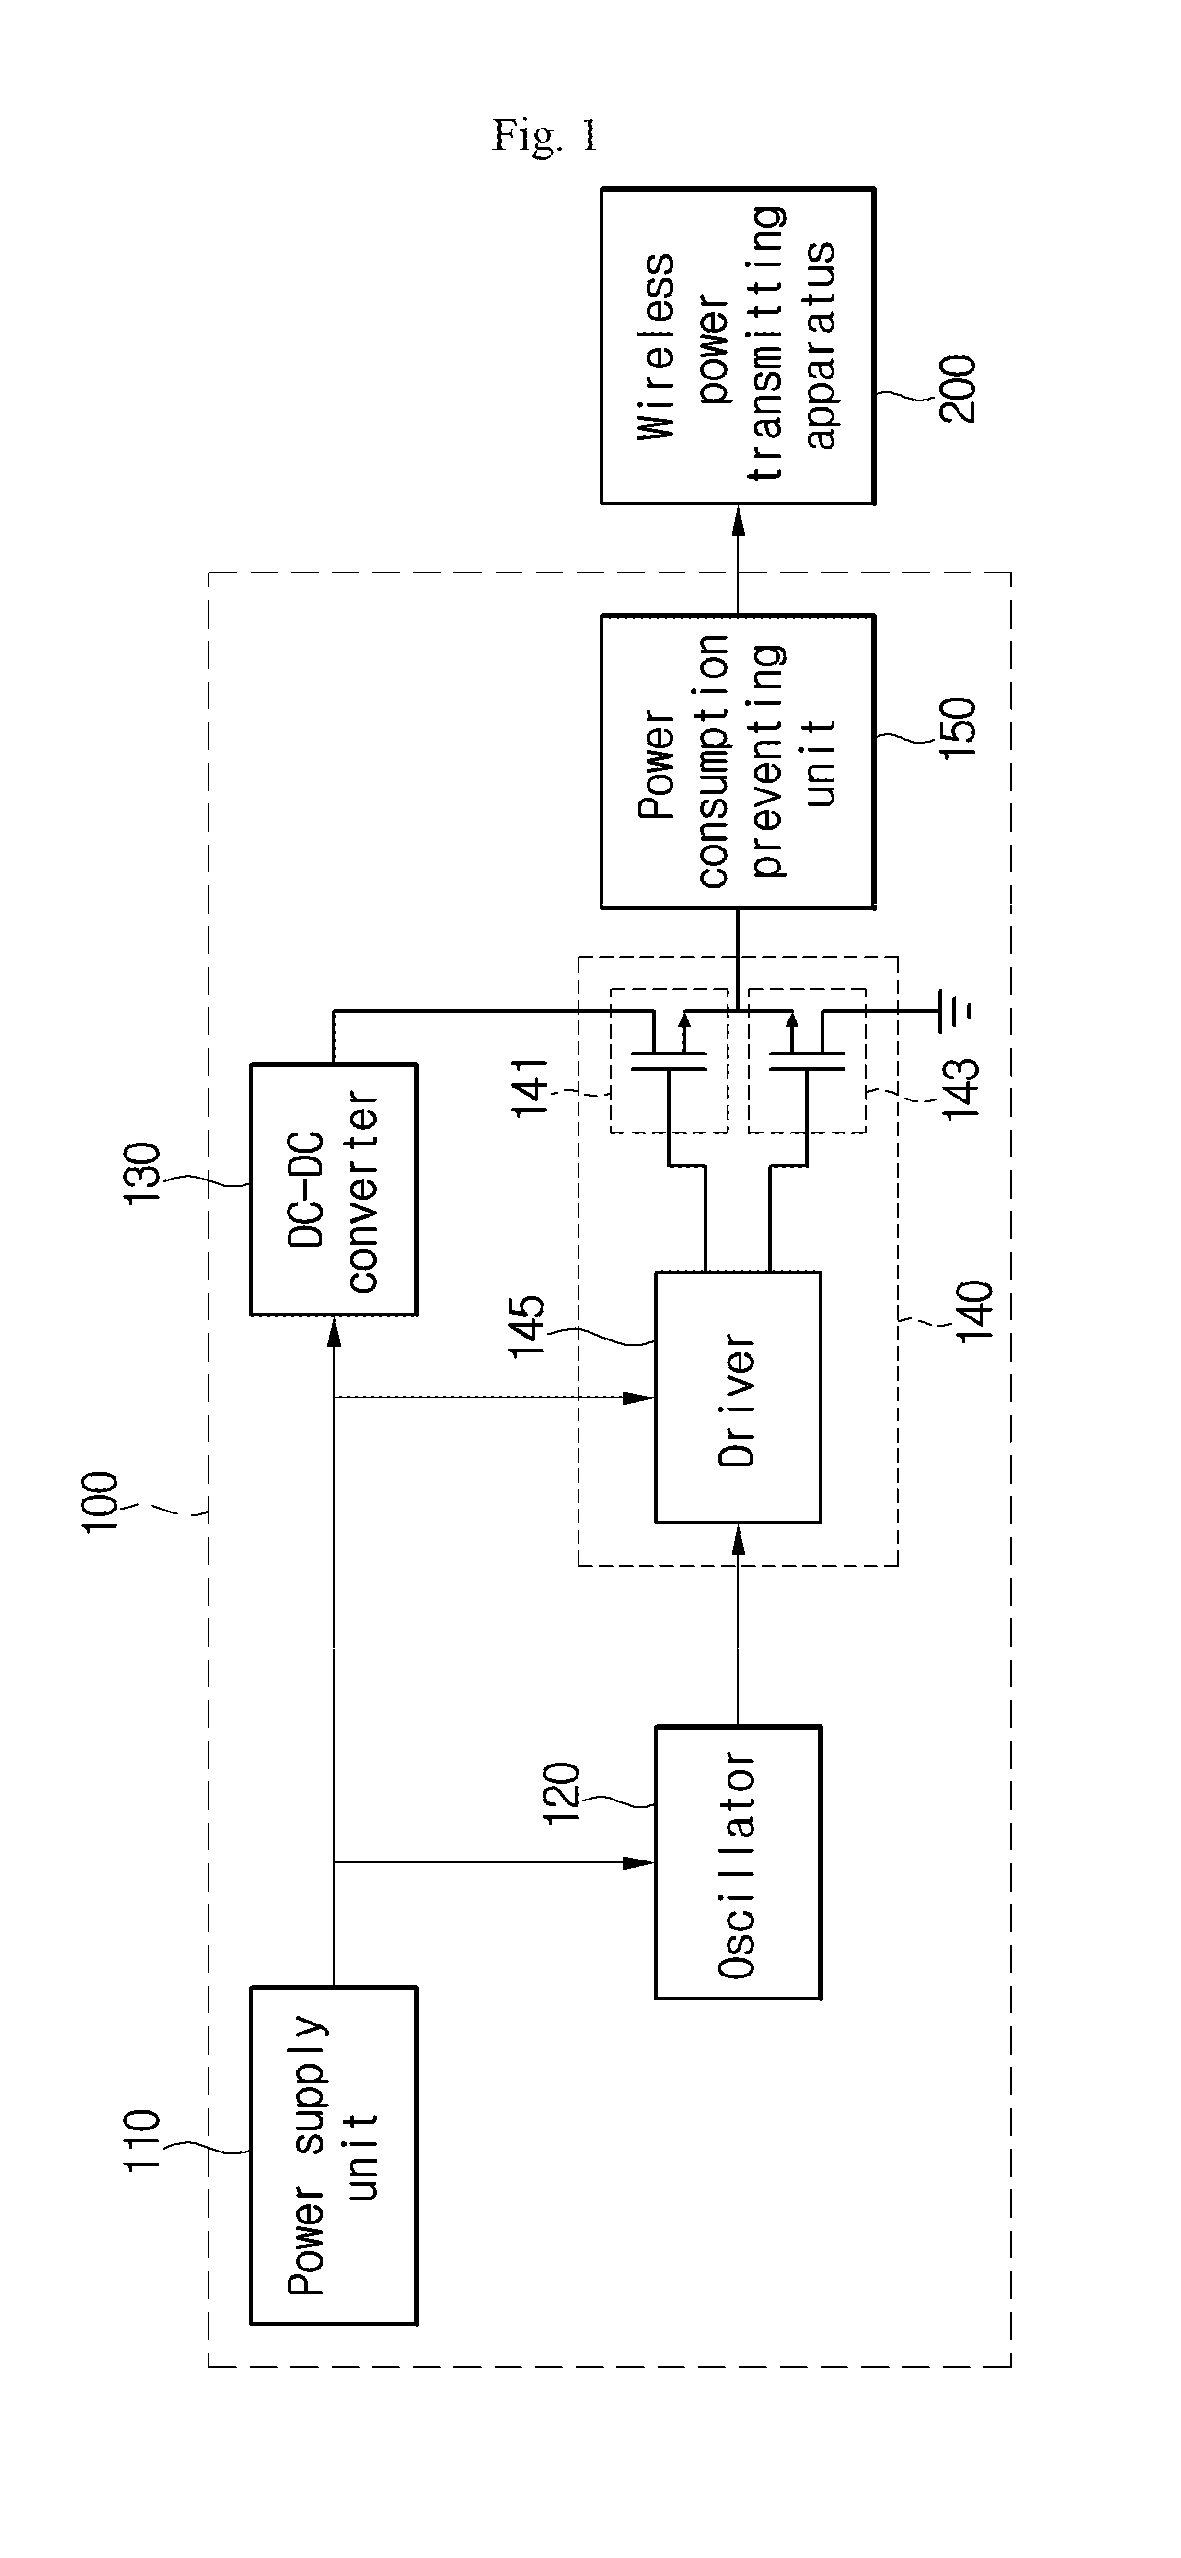 Electric power supplying device, of a wireless electric power transmission apparatus and method for supplying electric power